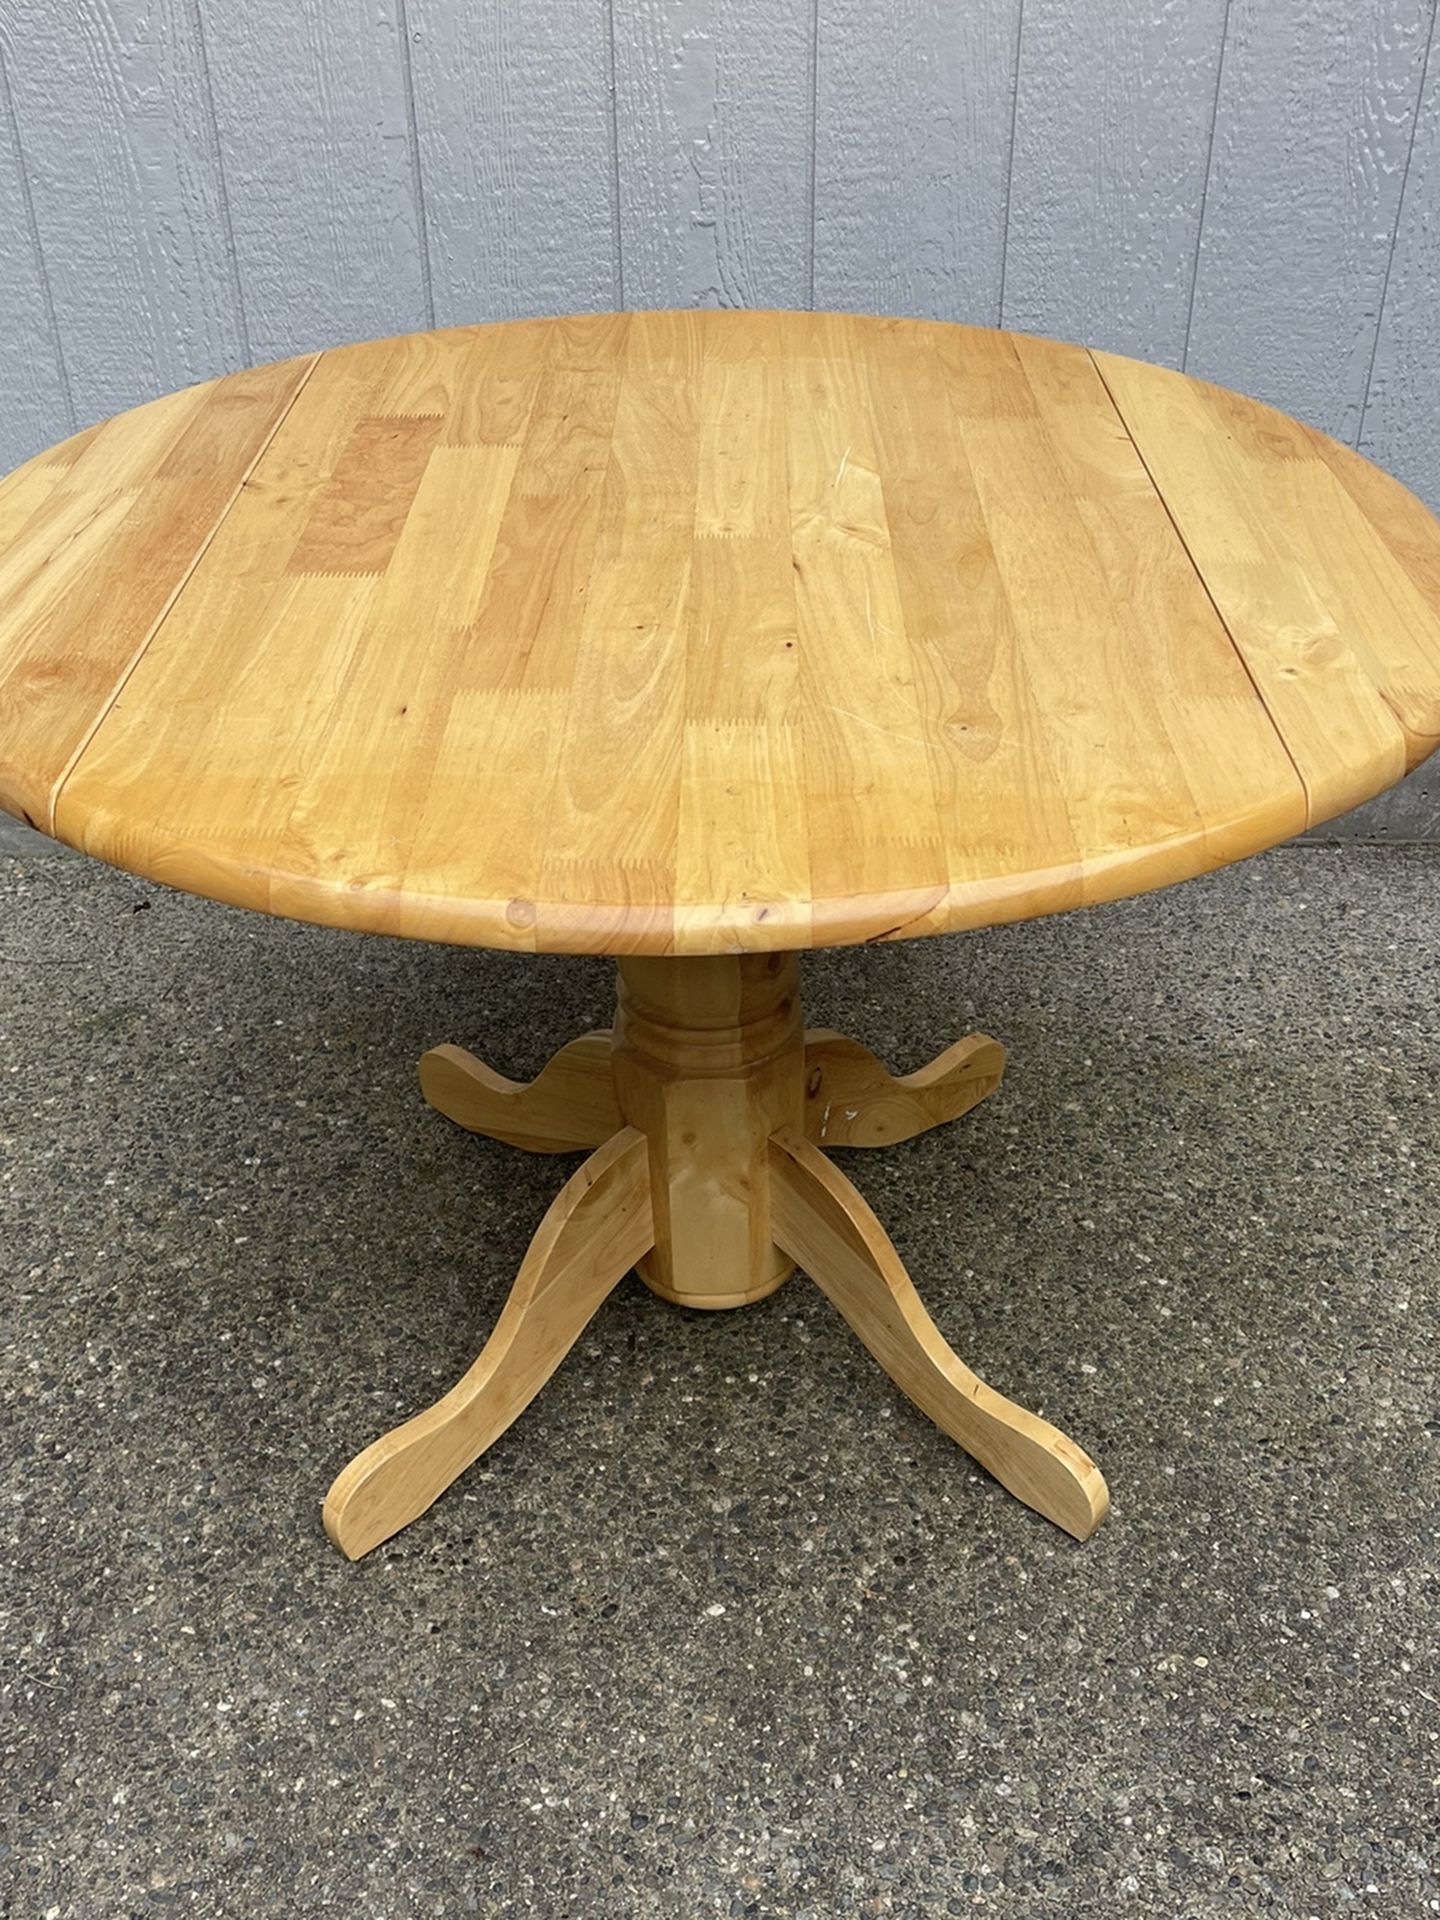 Solid maple kitchen table